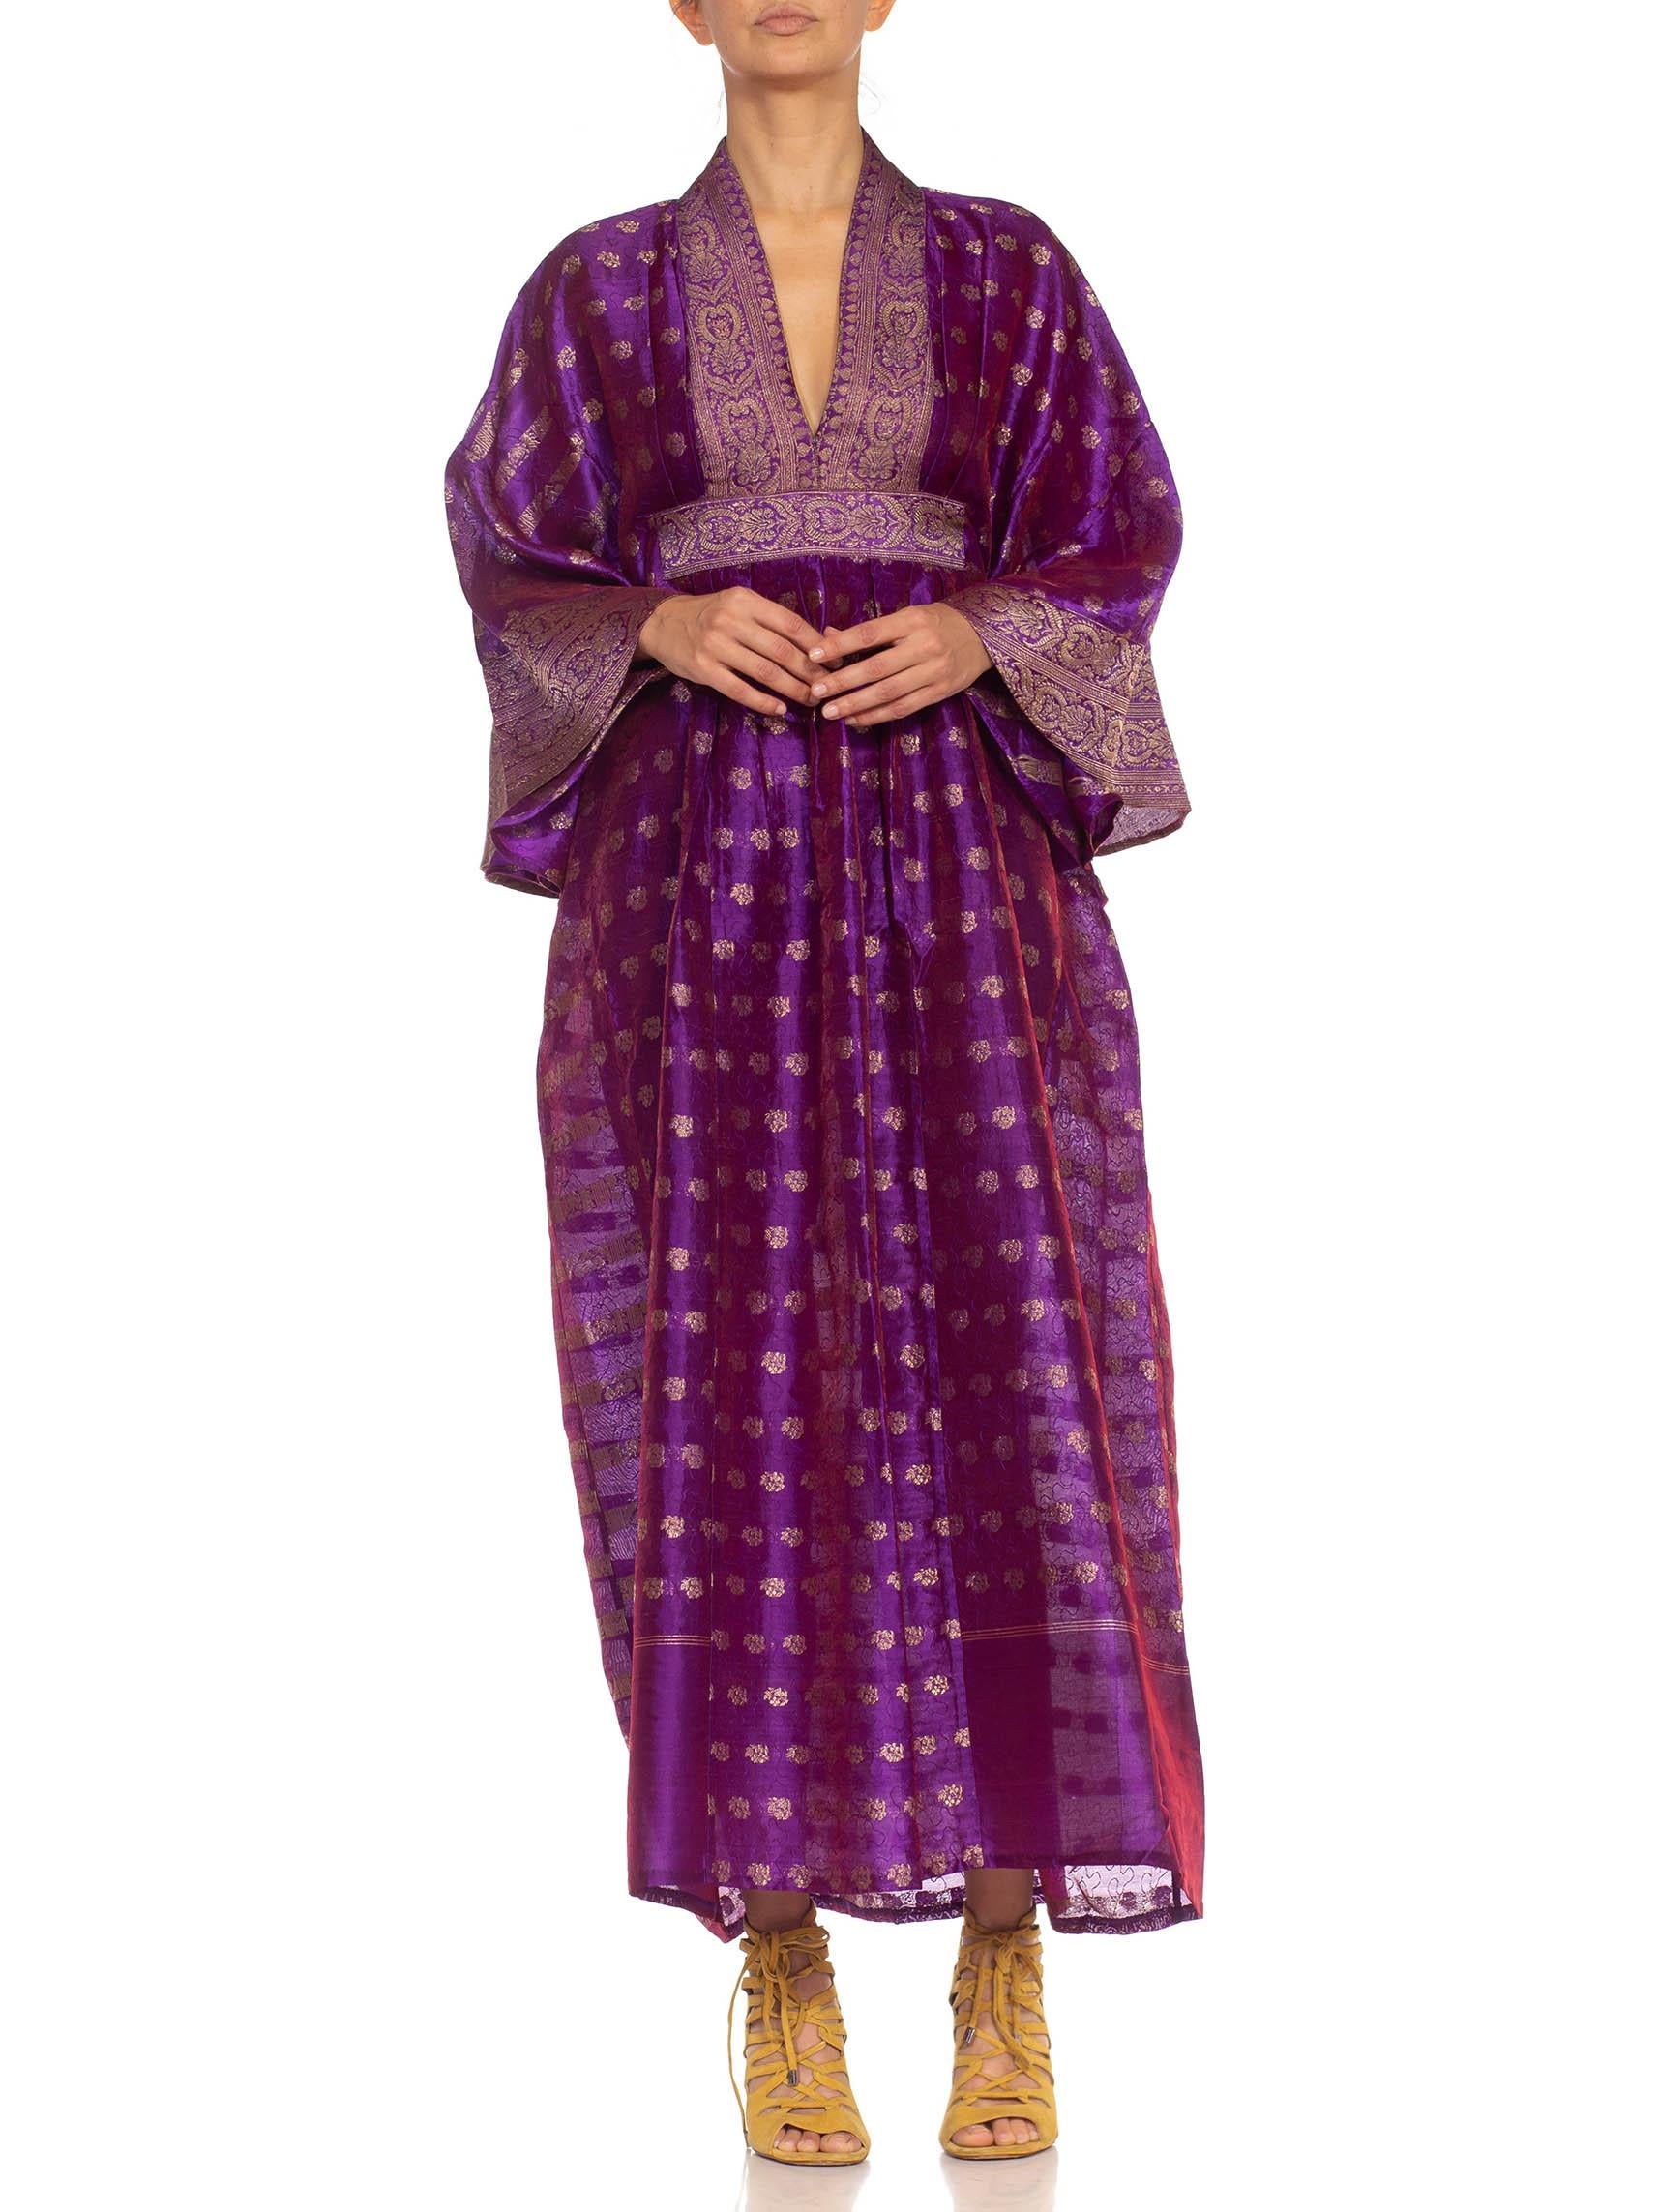 MORPHEW COLLECTION Purple & Gold Silk Kaftan Made From Vintage Saris For Sale 6